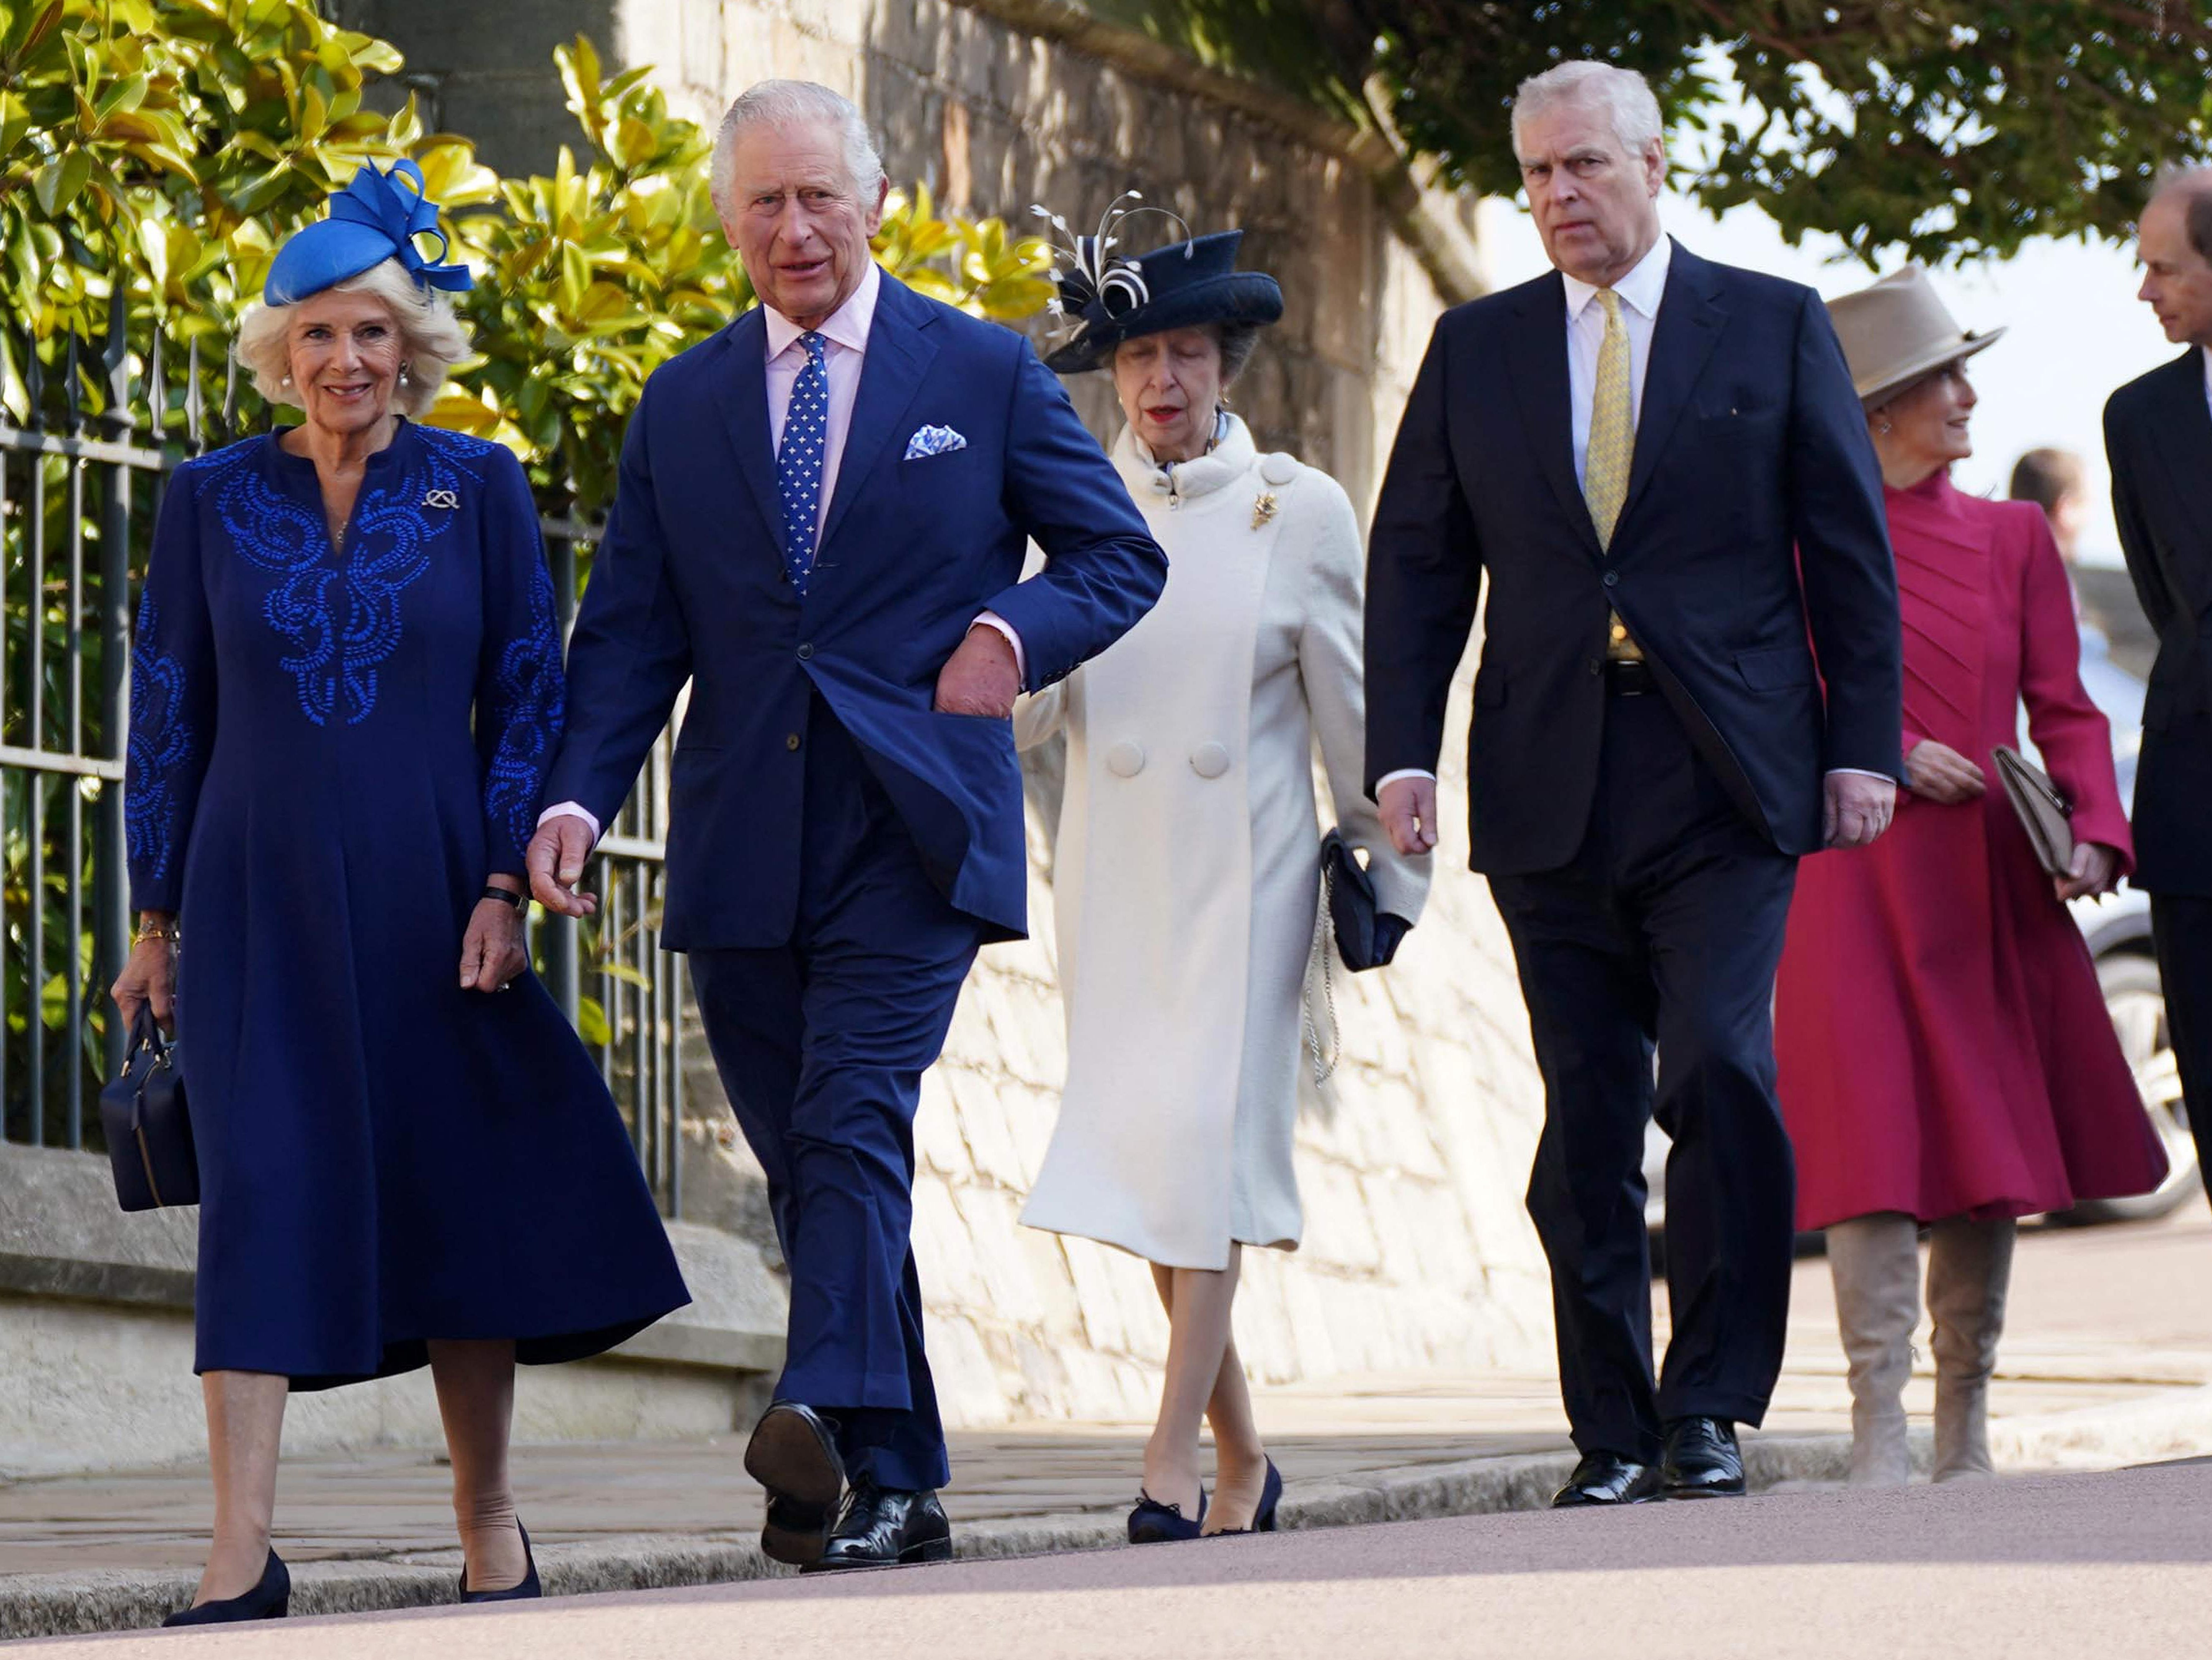 King Charles III (2L) and Queen Camilla (L) walk with Princess Anne, Princess Royal (C), Prince Andrew, Duke of York (3R), Sophie, Duchess of Edinburgh (2R) and Prince Edward, Duke of Edinburgh as they arrive for the Easter Mattins Service at St. George’s Chapel, Windsor Castle